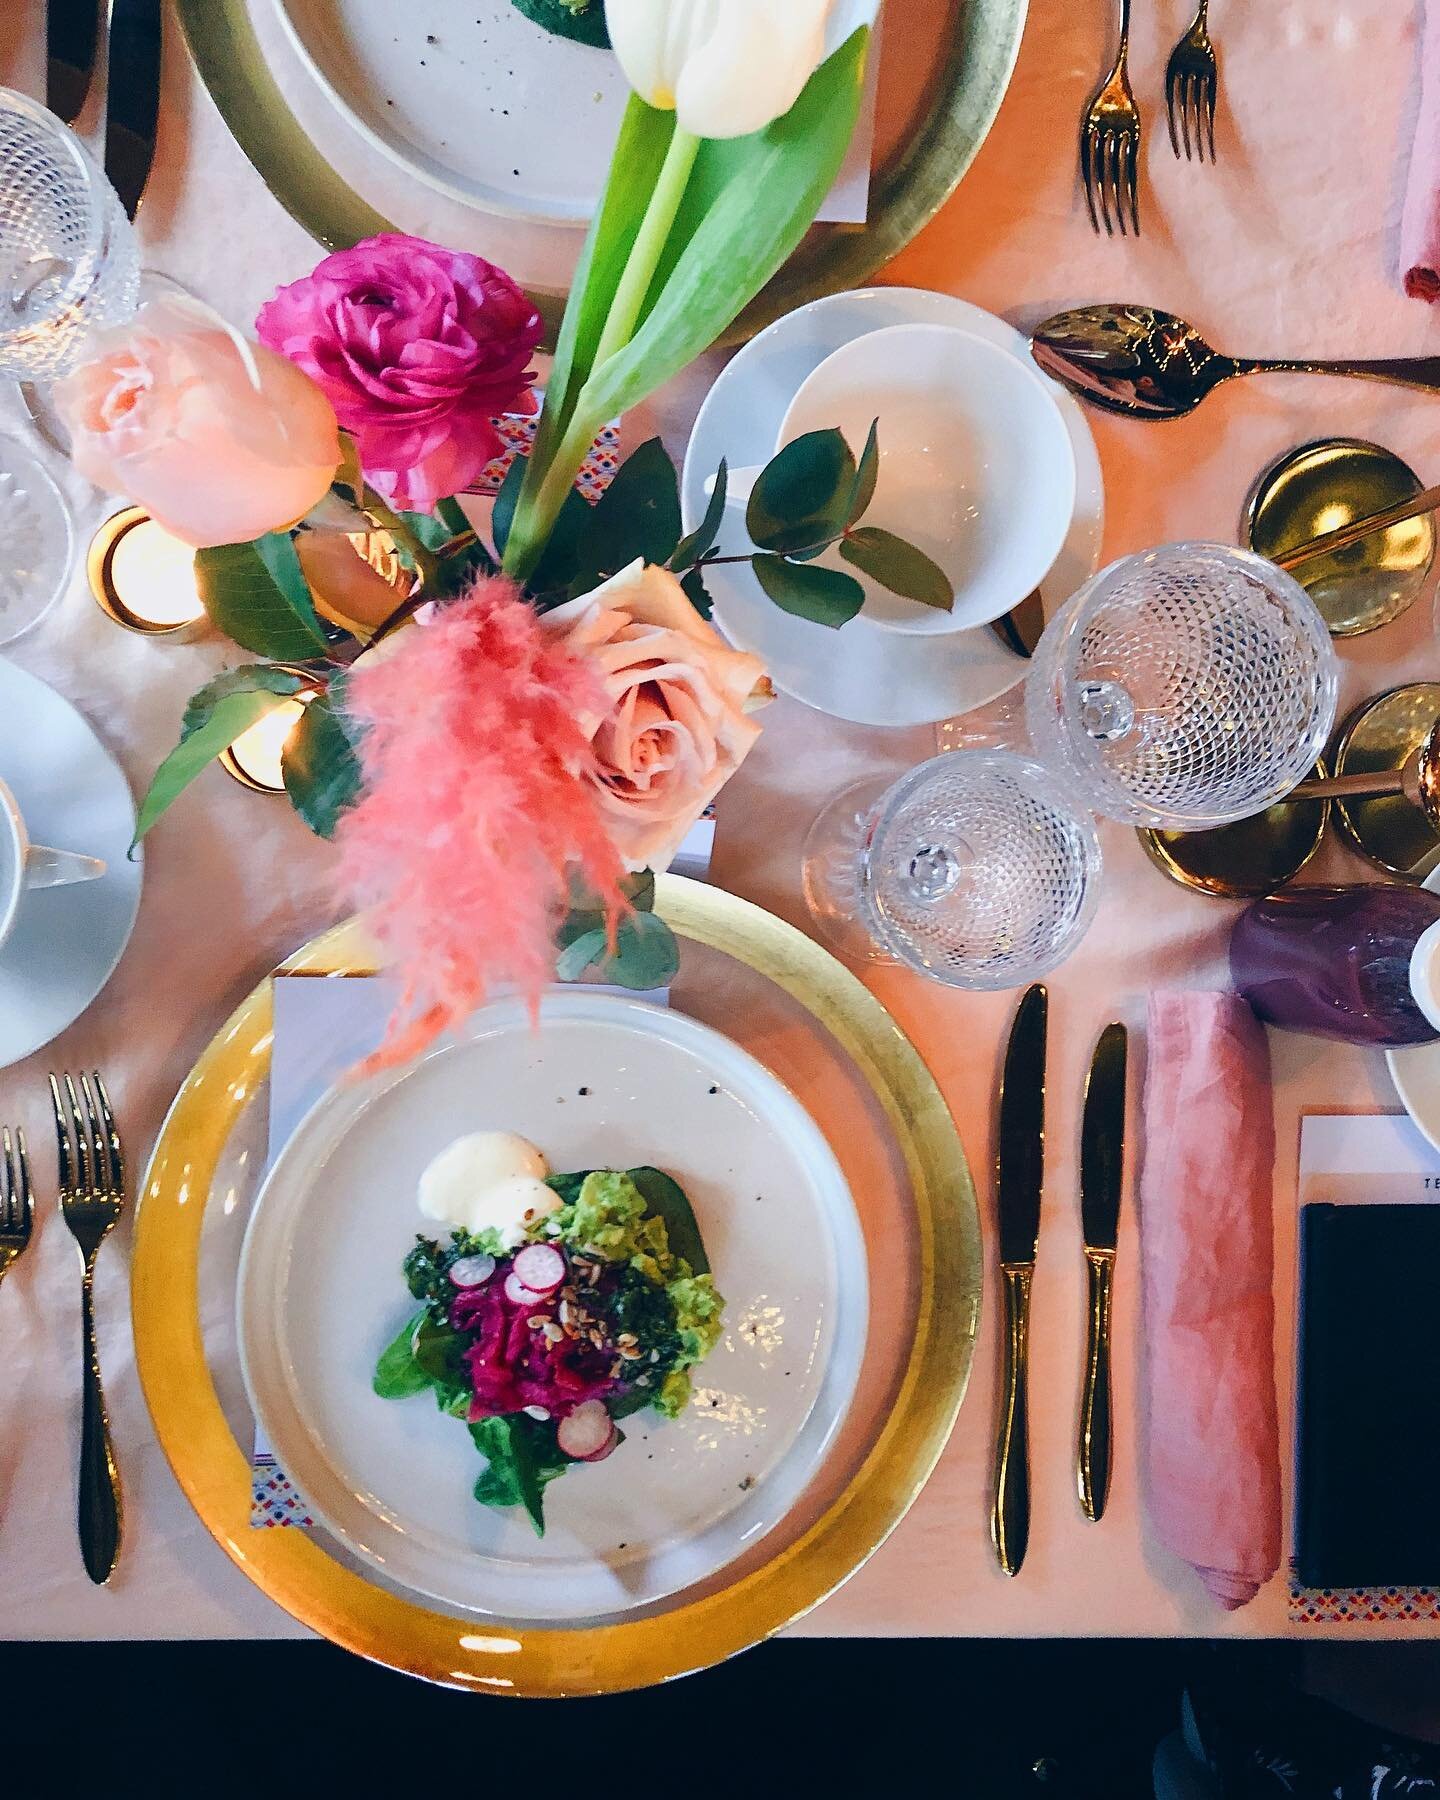 Sweet mornings complete with florals and food. The Rose and Food way.